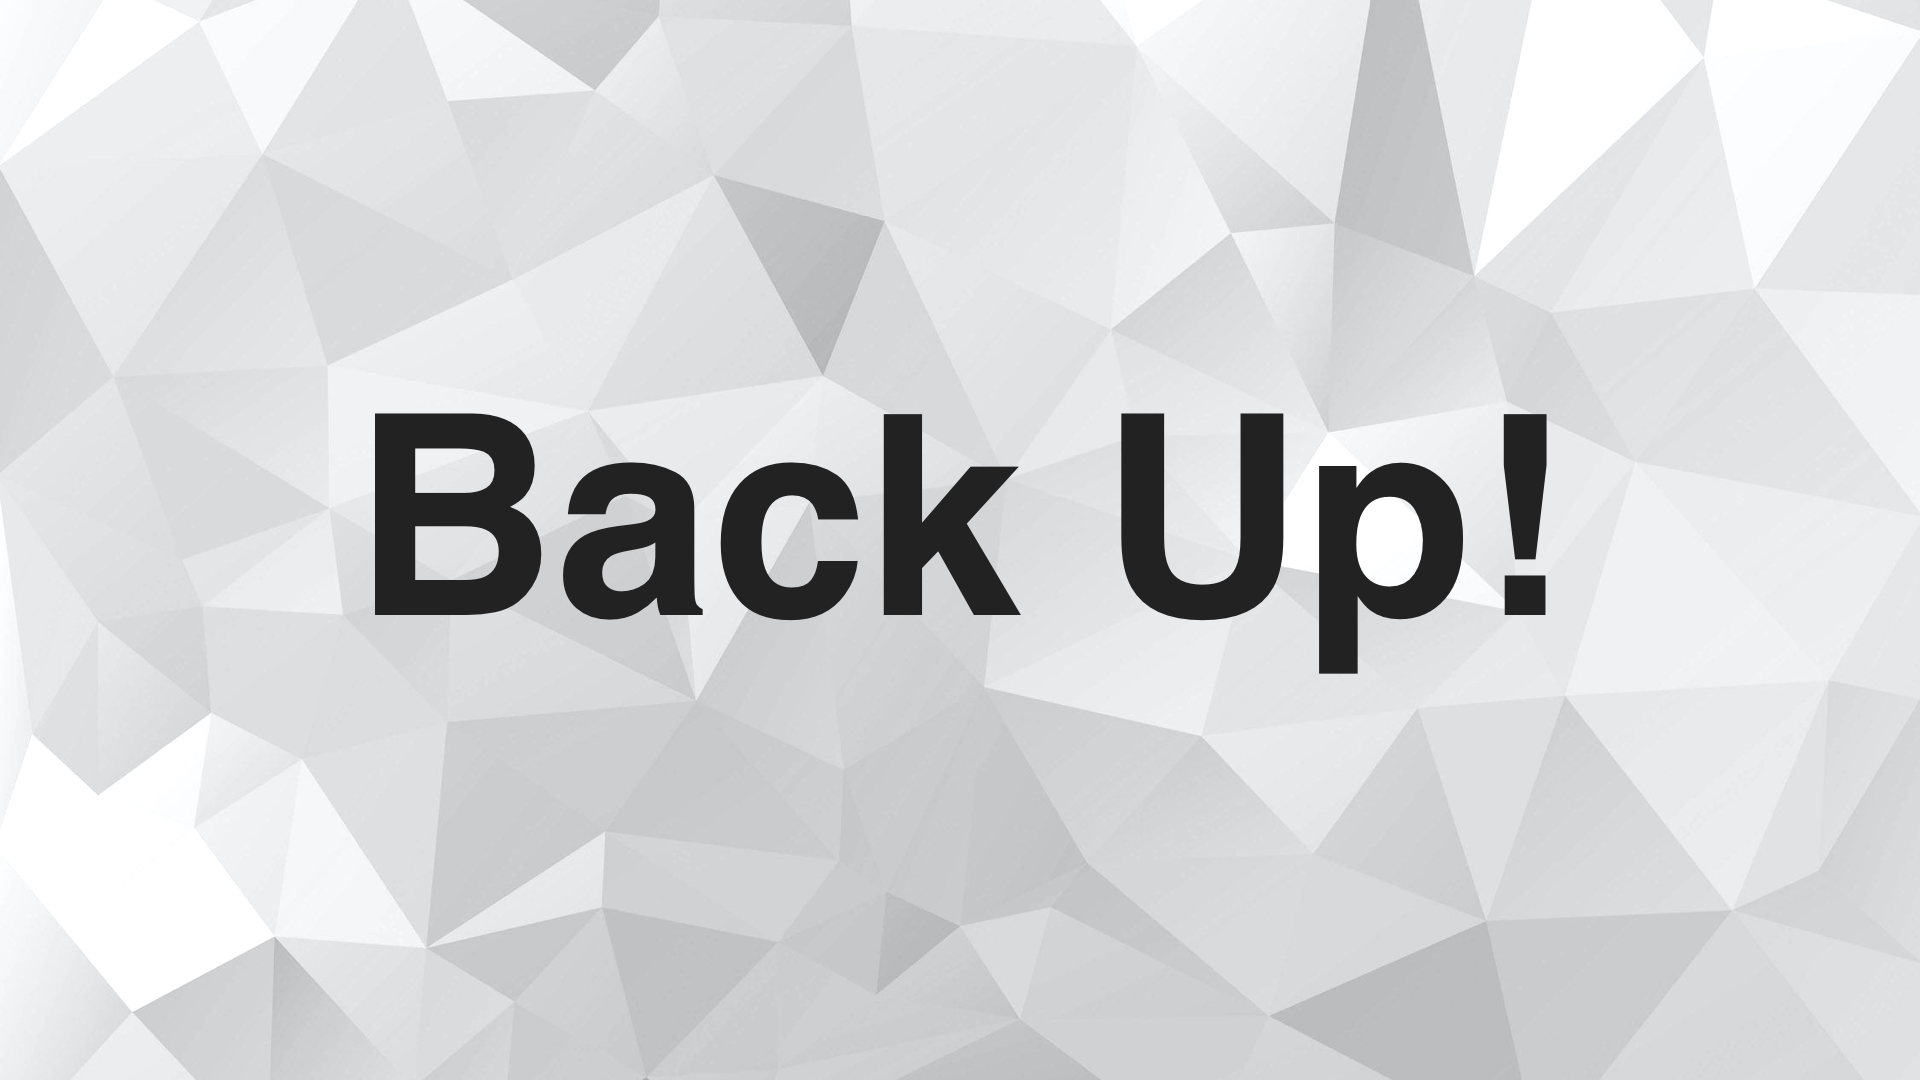 Backing up is not only for your data